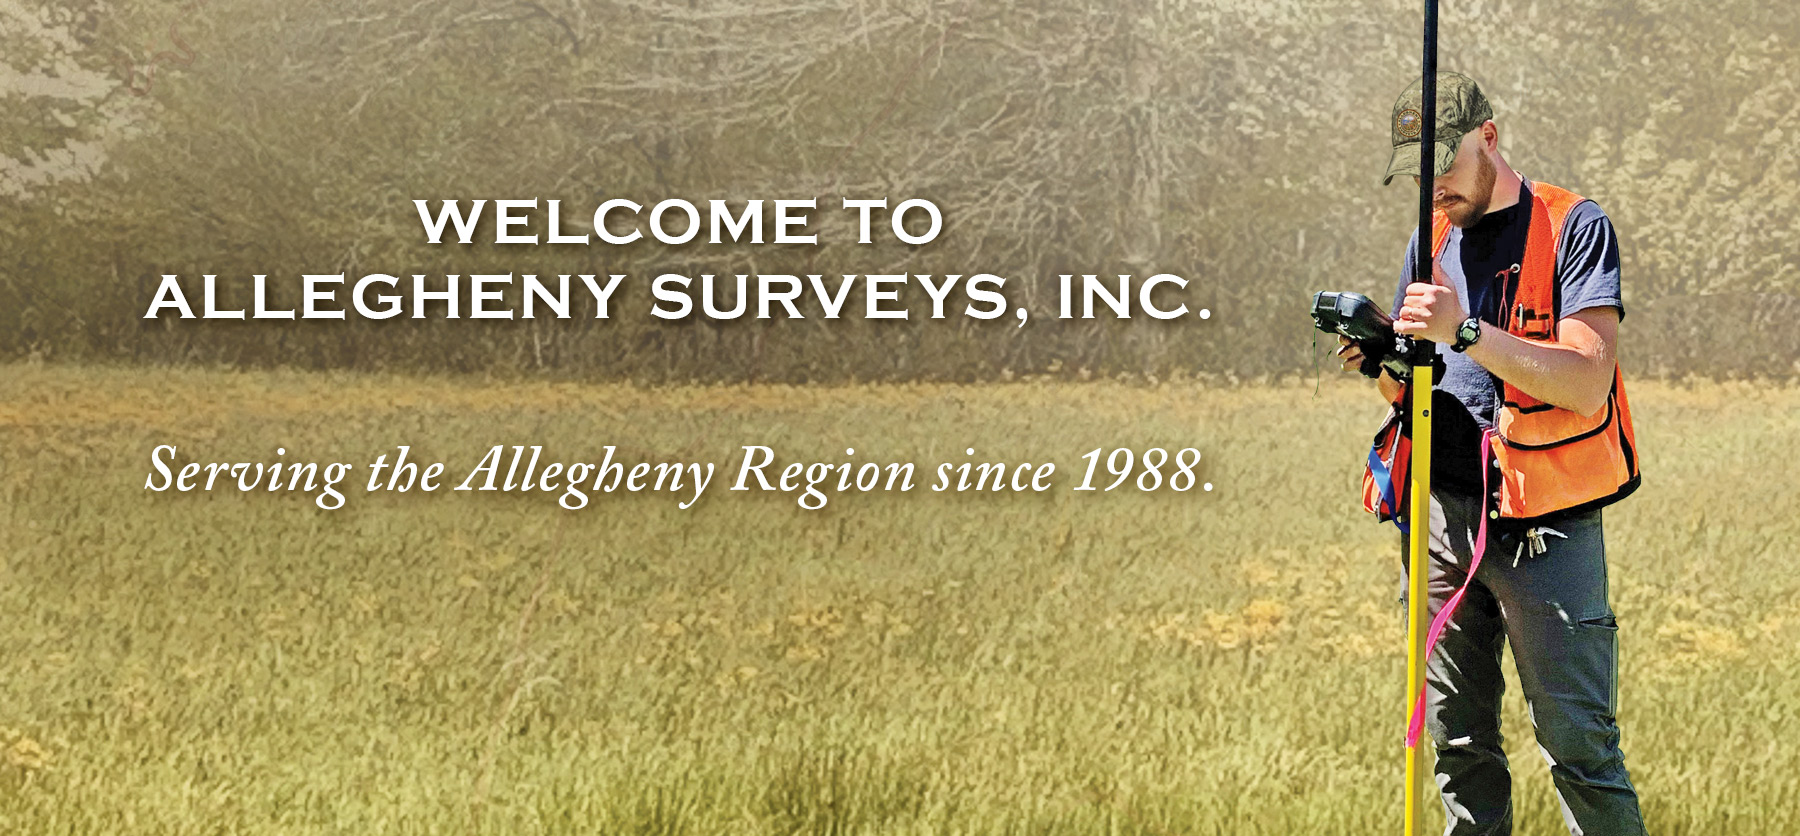 Welcome to Allegheny Surveys, Inc.